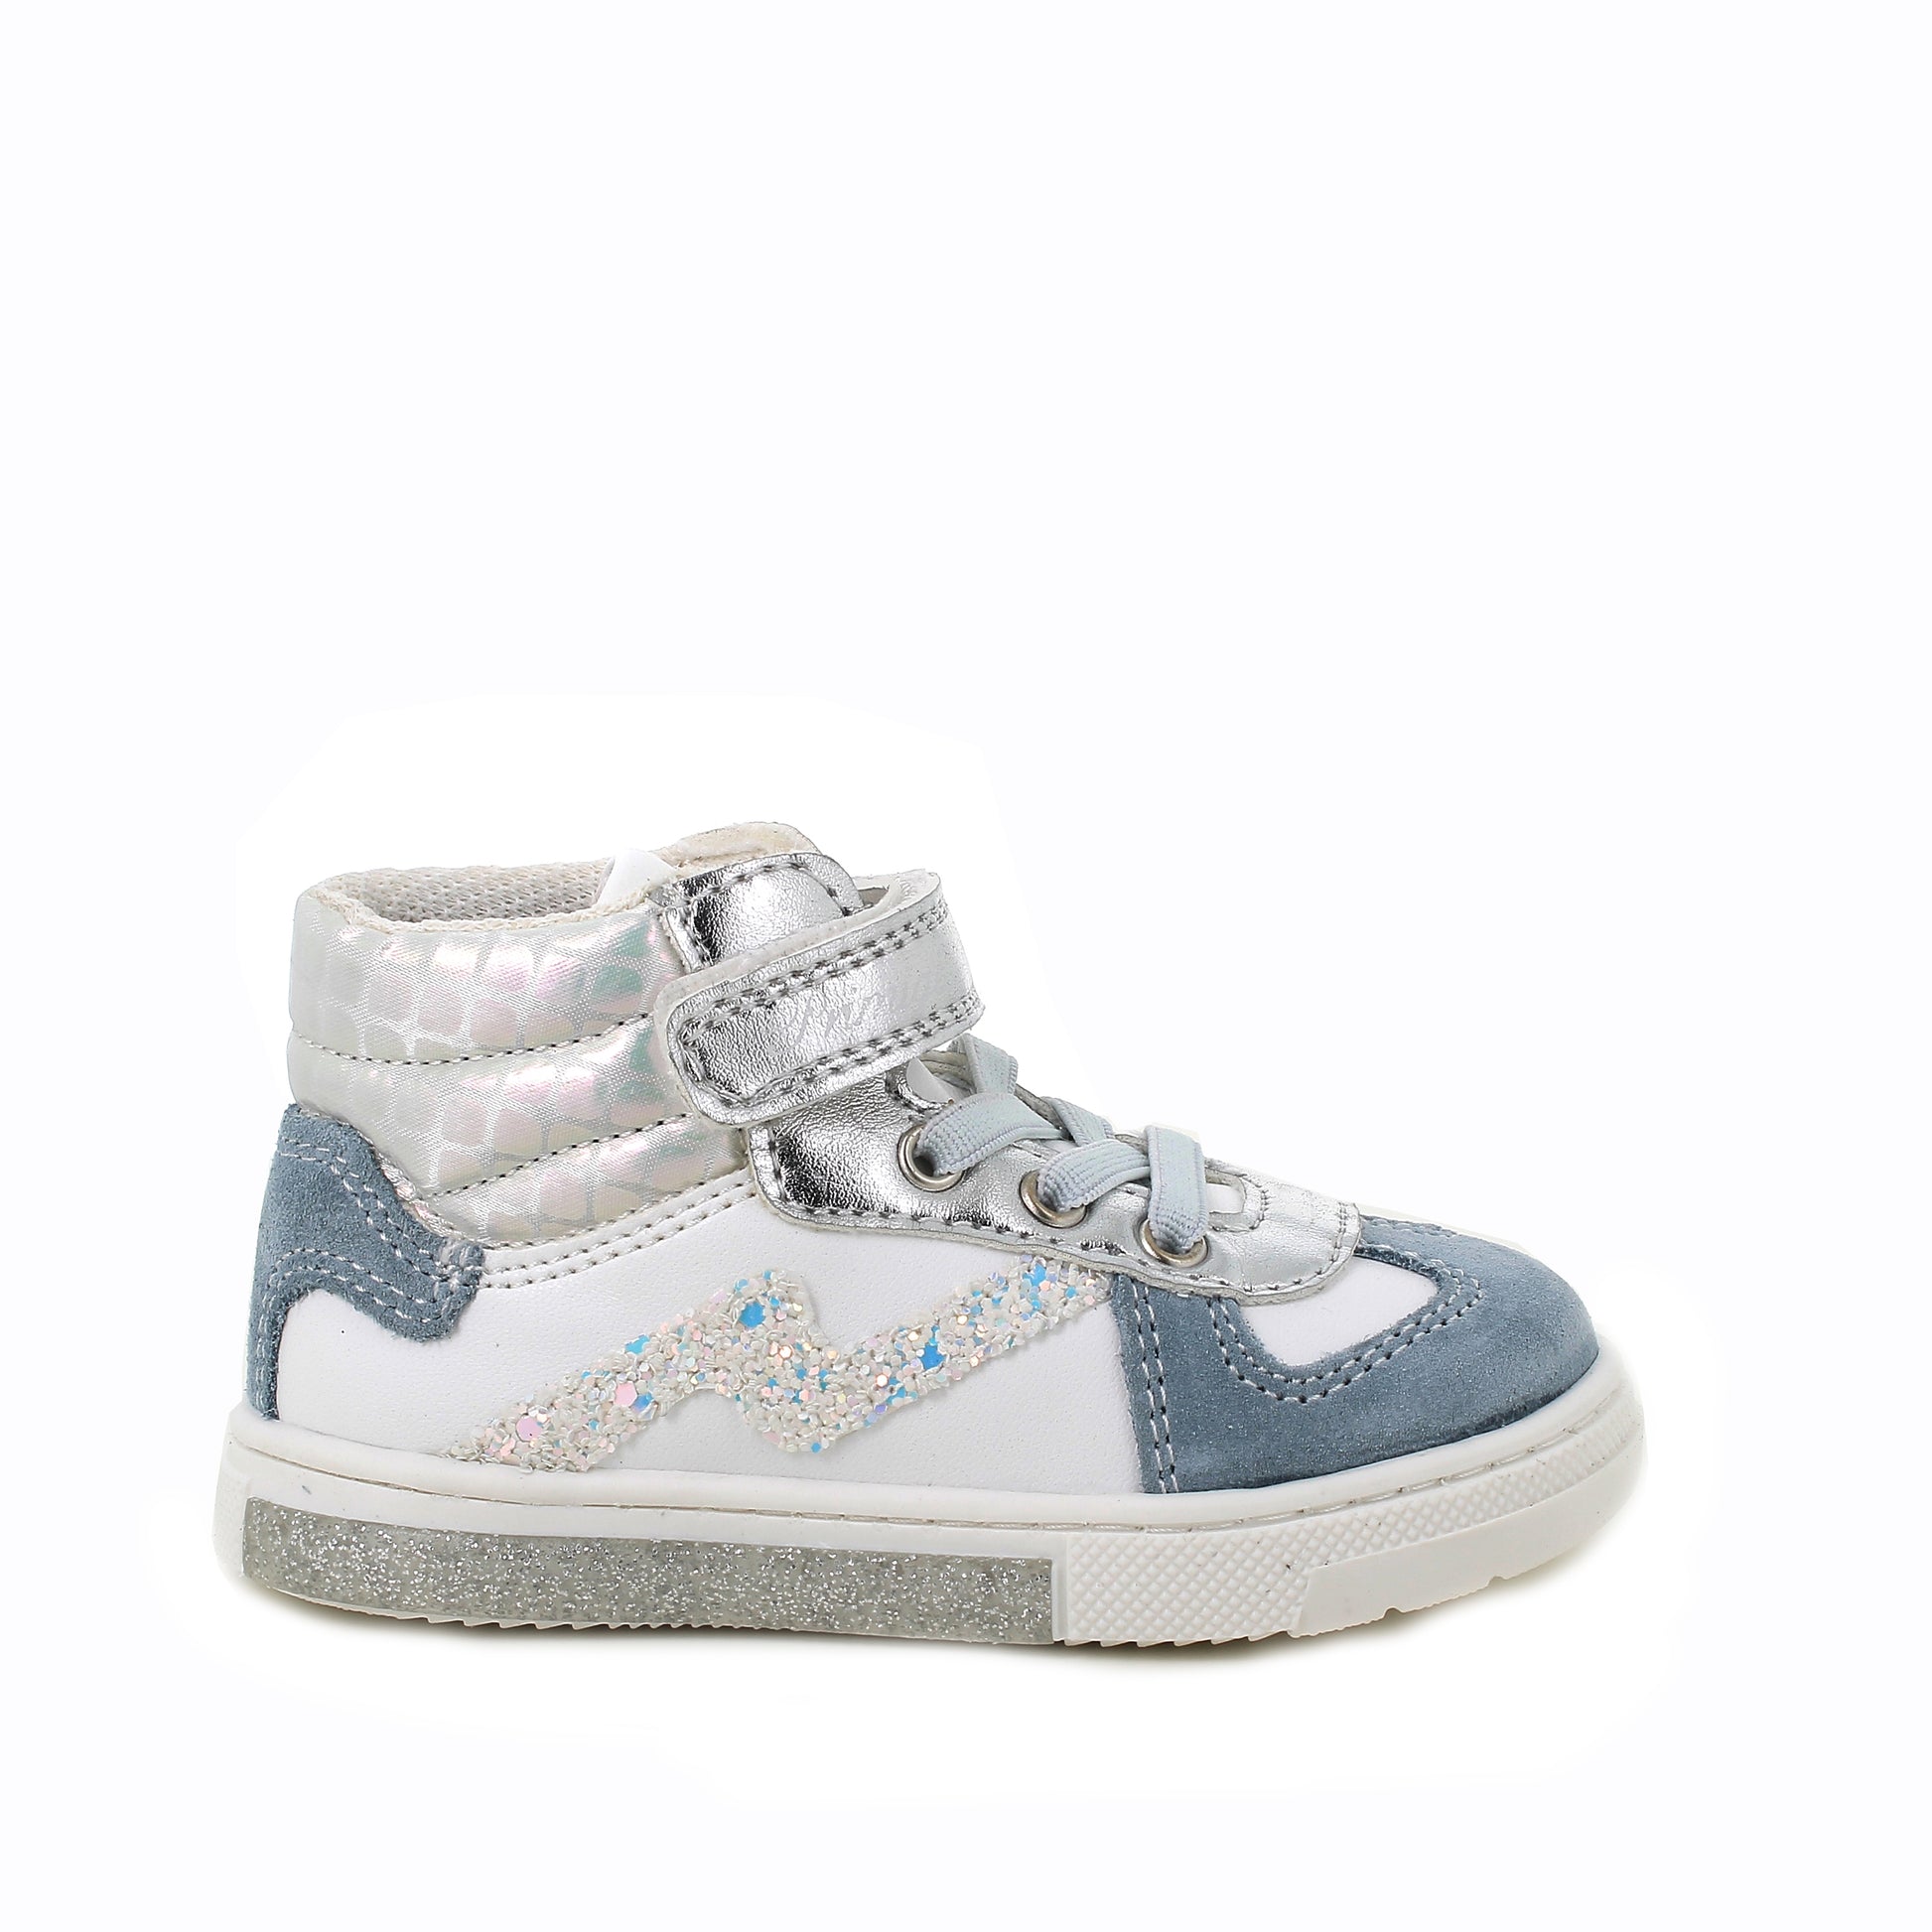 A girls Hi-Top boot by Primigi, style 4904500 Baby Glitter, in white, silver and blue leather with glitter trim, faux laces and velcro fastening. Right side view. 